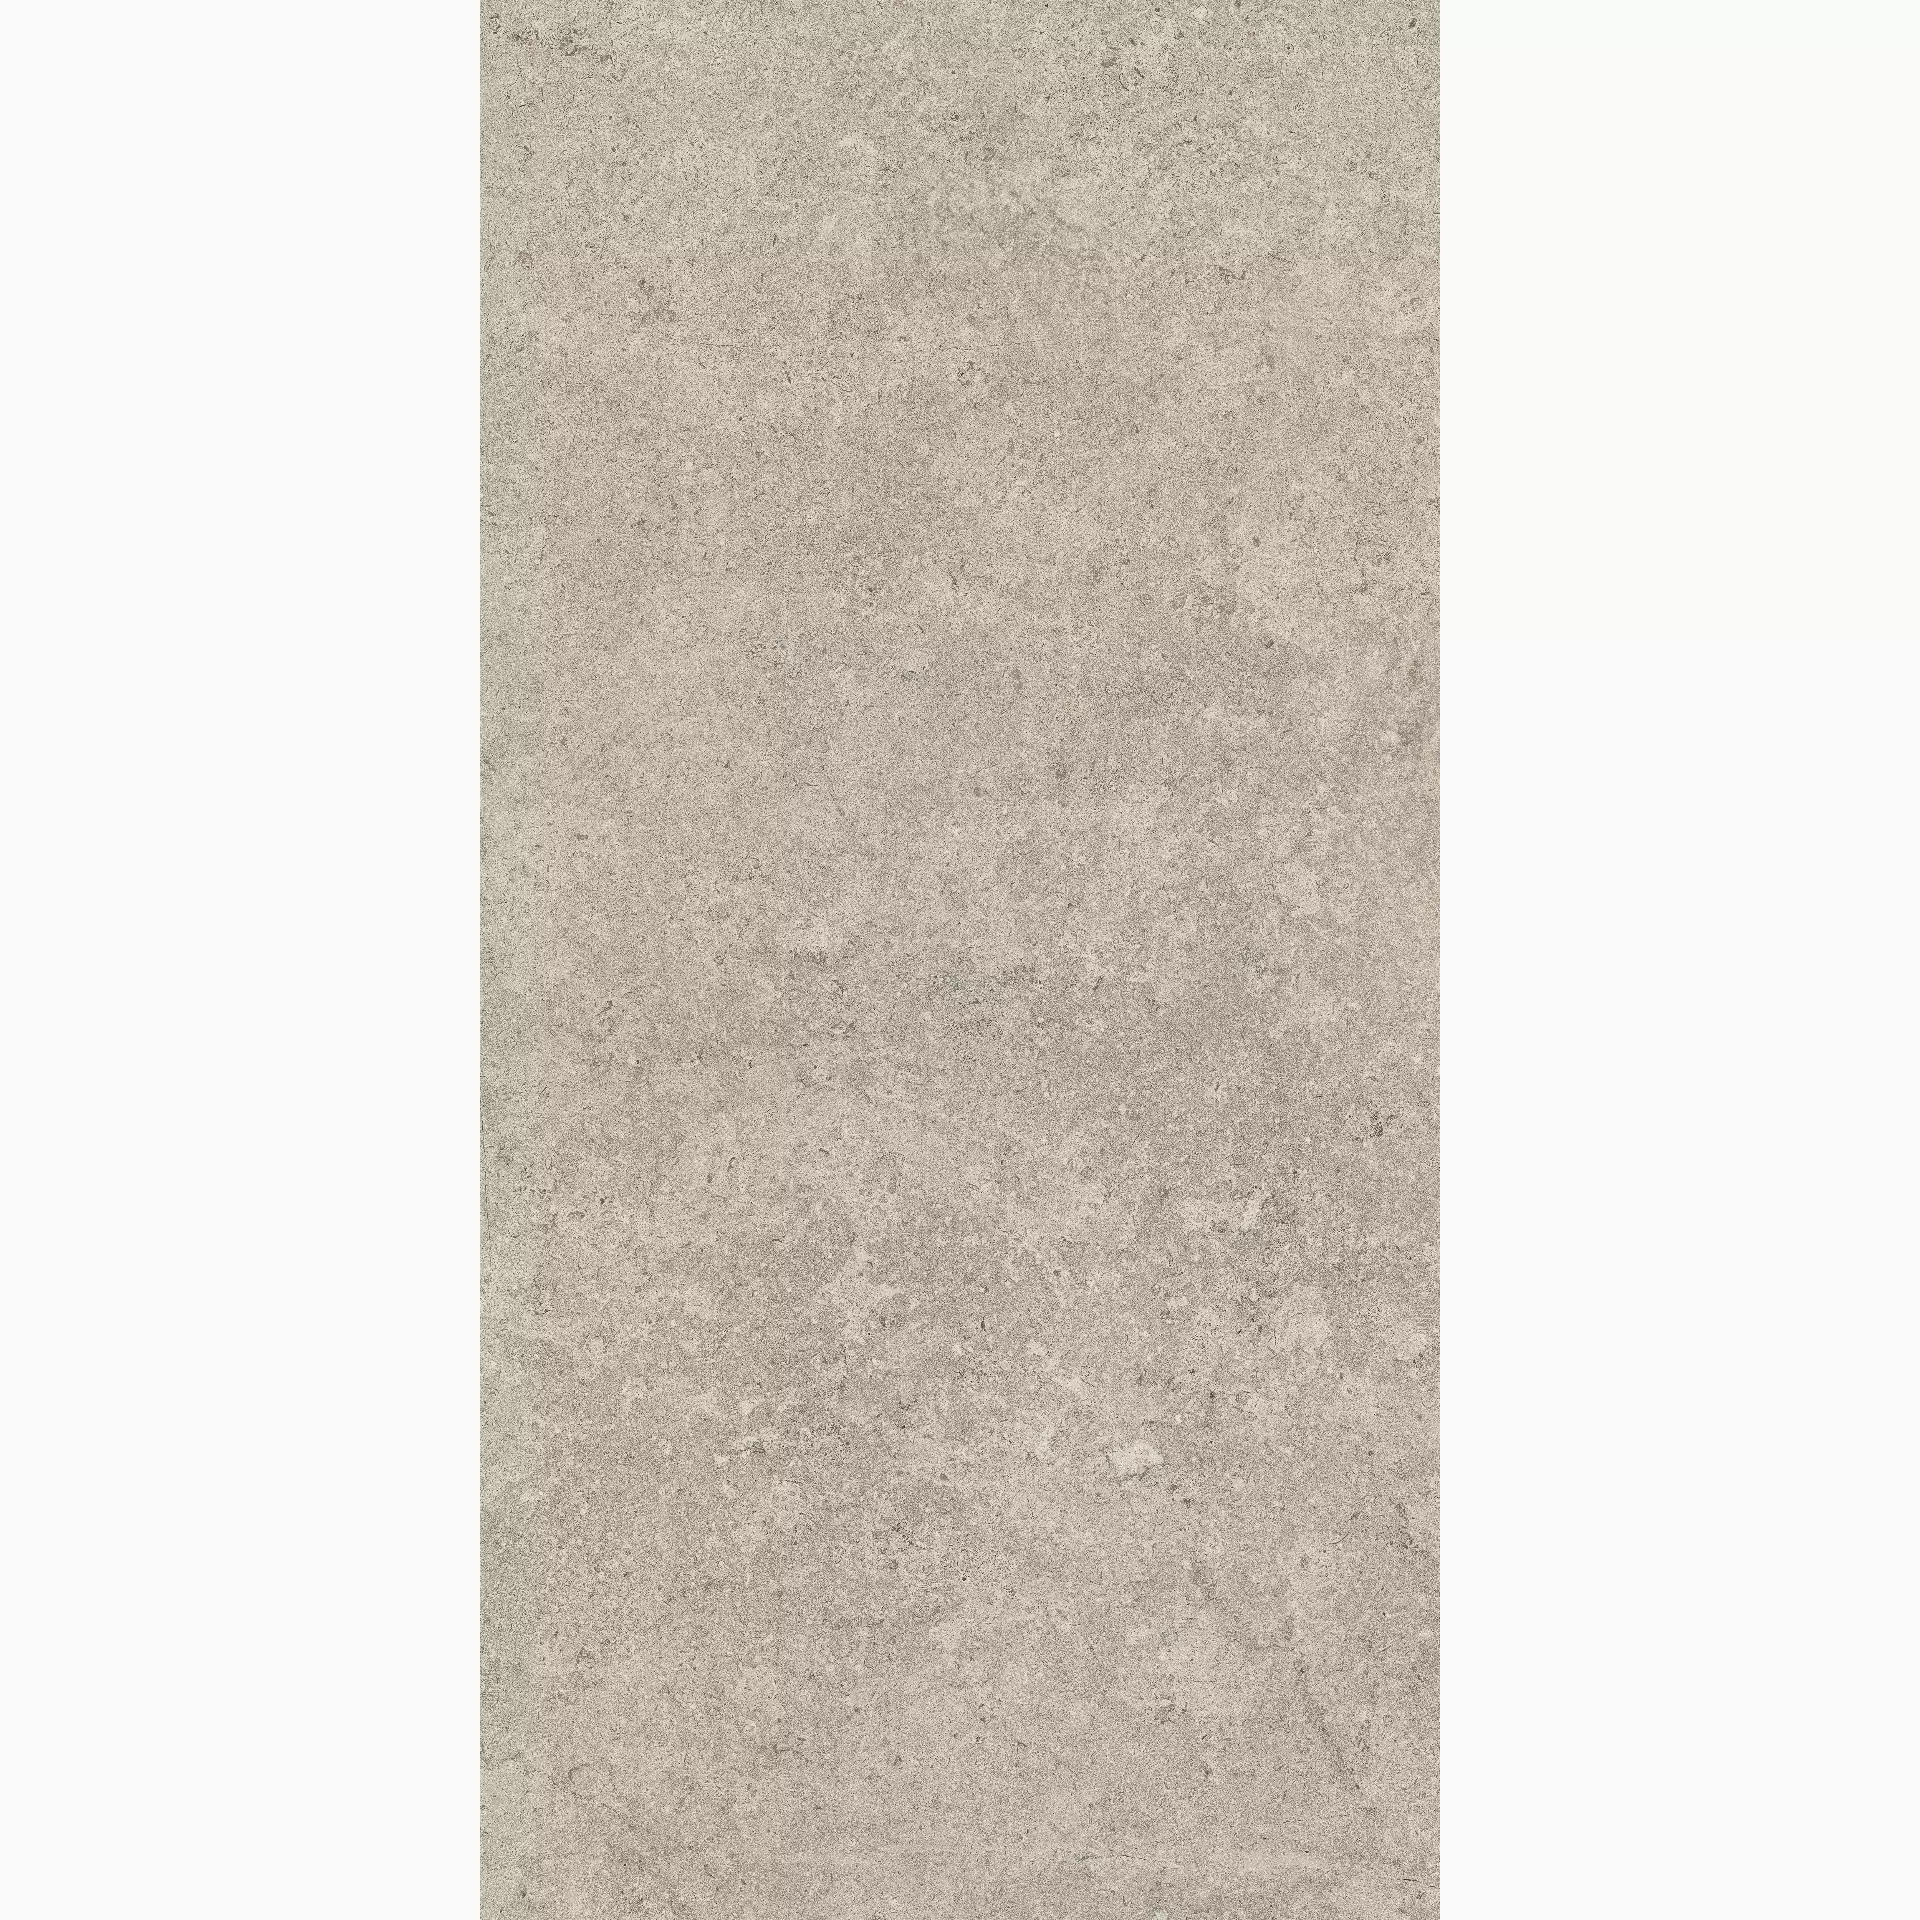 Cottodeste Pura Sand Hammered Protect EGXPR80 60x120cm rectified 20mm